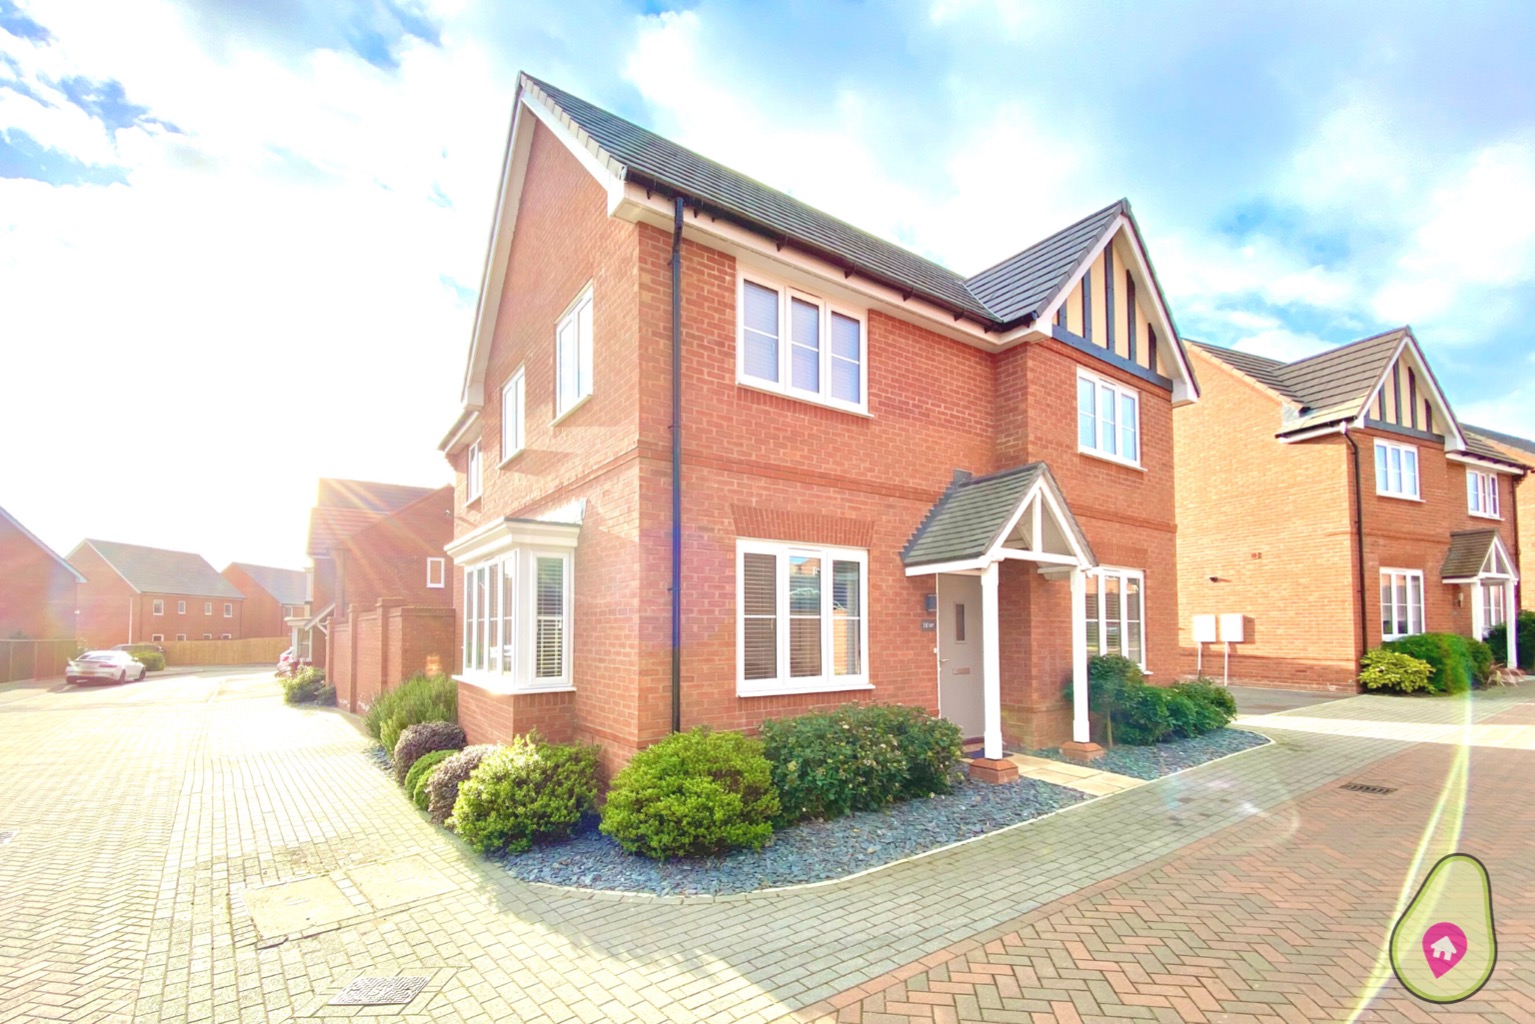 Built by Bloor Homes to the Astley design this well laid out home offers great living space, perfect for entertaining and the current owners have made some great upgrades while enjoying their time here so it's presented in show home condition throughout.